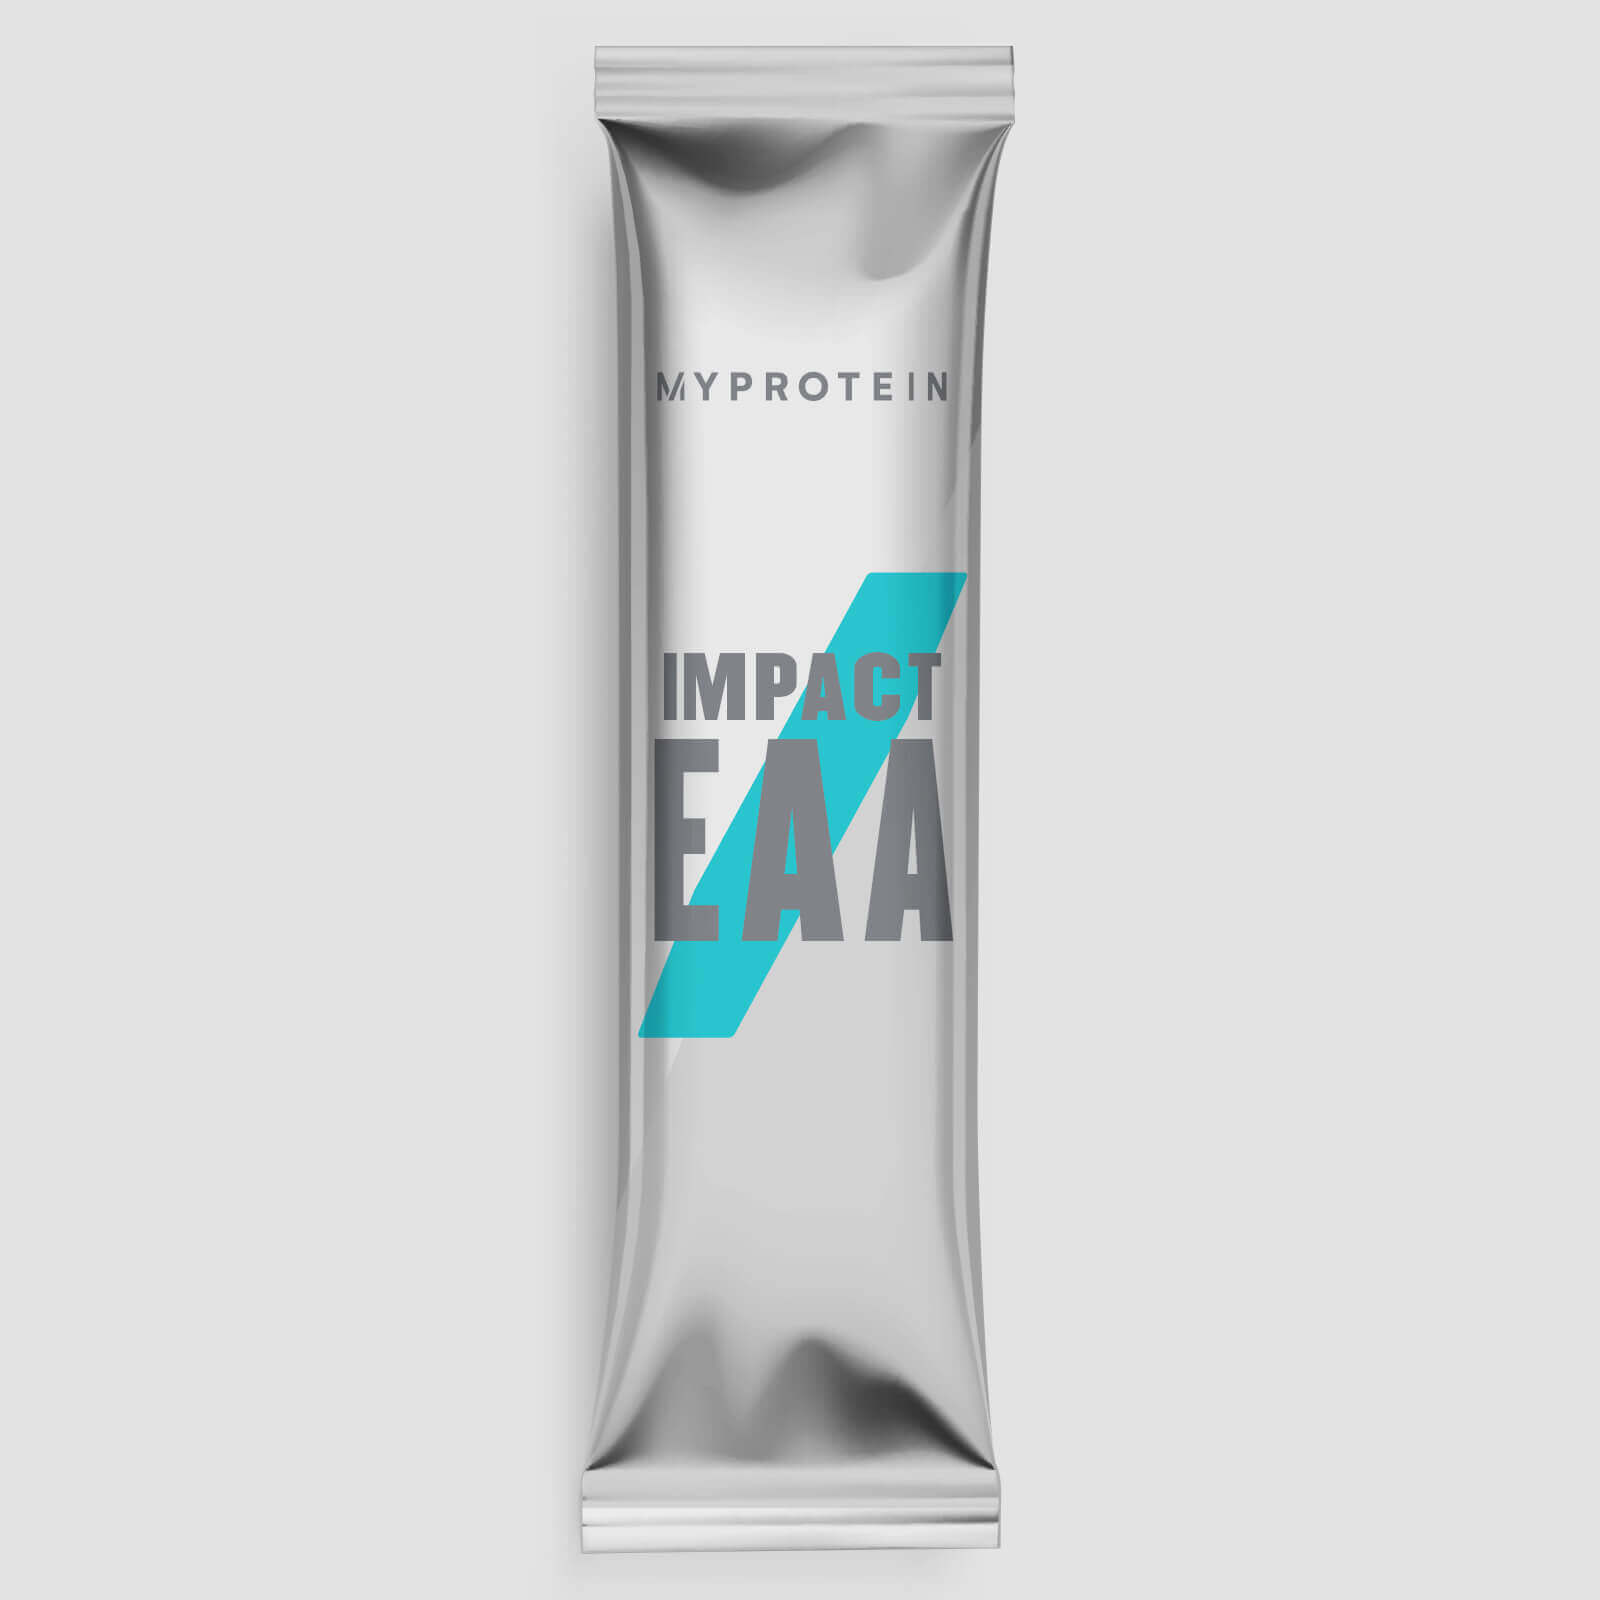 Myprotein Impact EAA Stick Pack (Sample) - 9g - Tropical